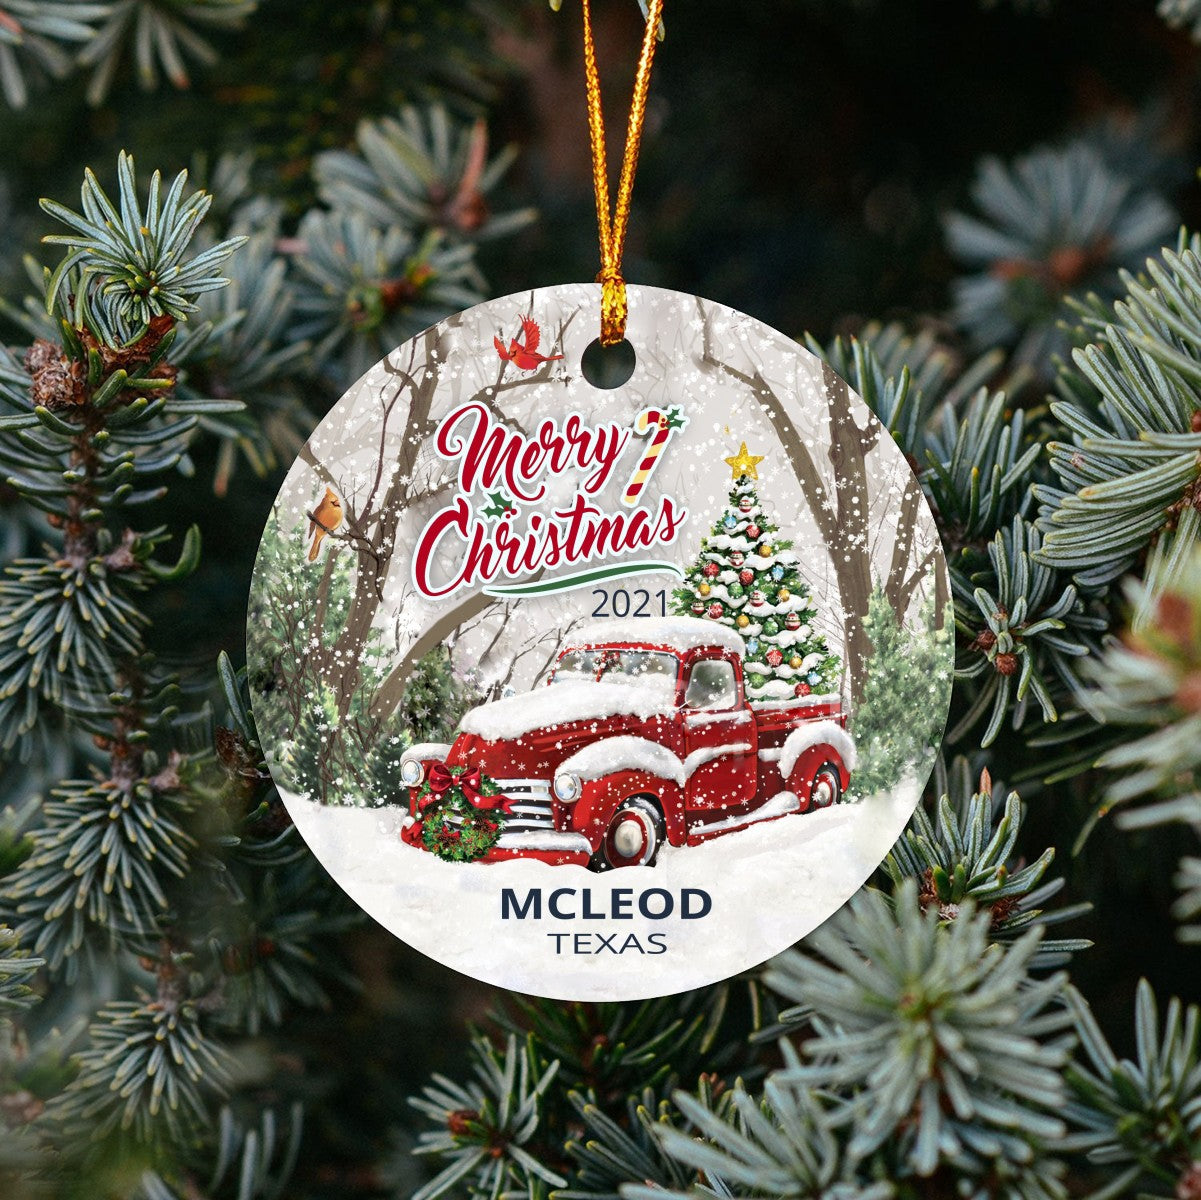 Christmas Tree Ornaments McLeod - Ornament With Name City, State McLeod Texas TX Ornament - Red Truck Xmas Ornaments 3'' Plastic Gift For Family, Friend And Housewarming